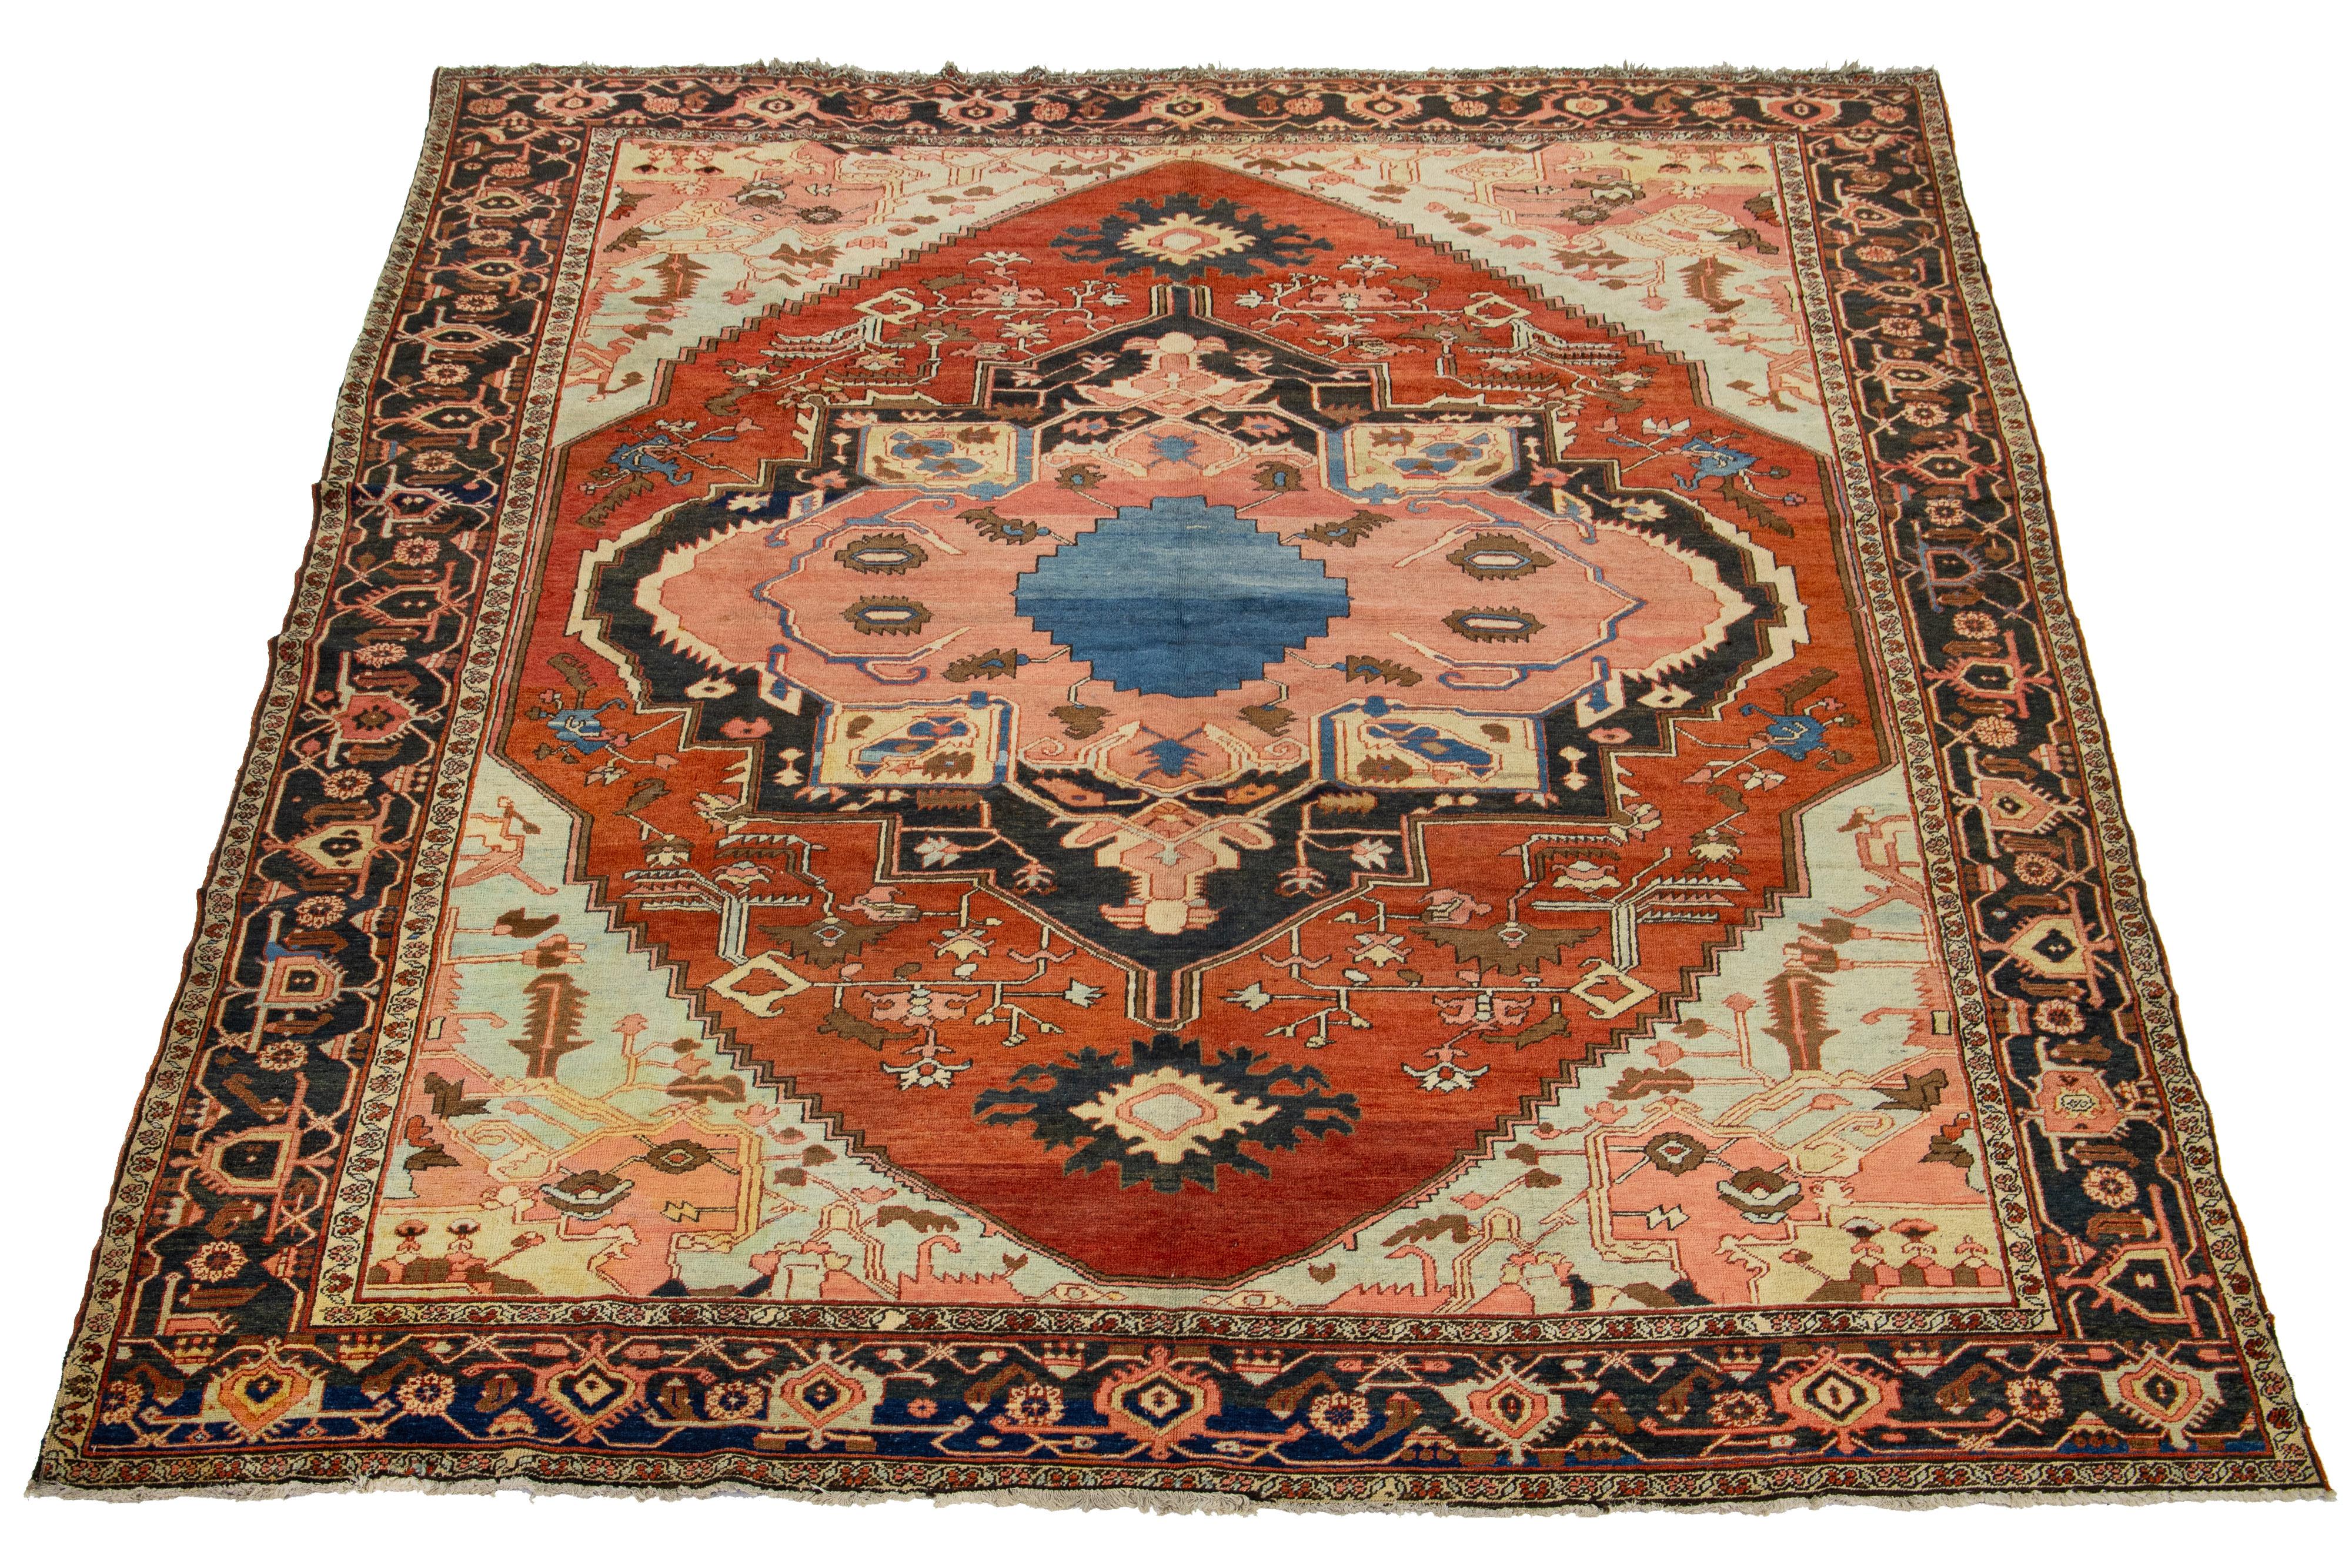 This antique Persian Serapi rug is made of hand-knotted wool. The rust field showcases a captivating medallion pattern adorned with multiple shades of colors.

This rug measures 9'2